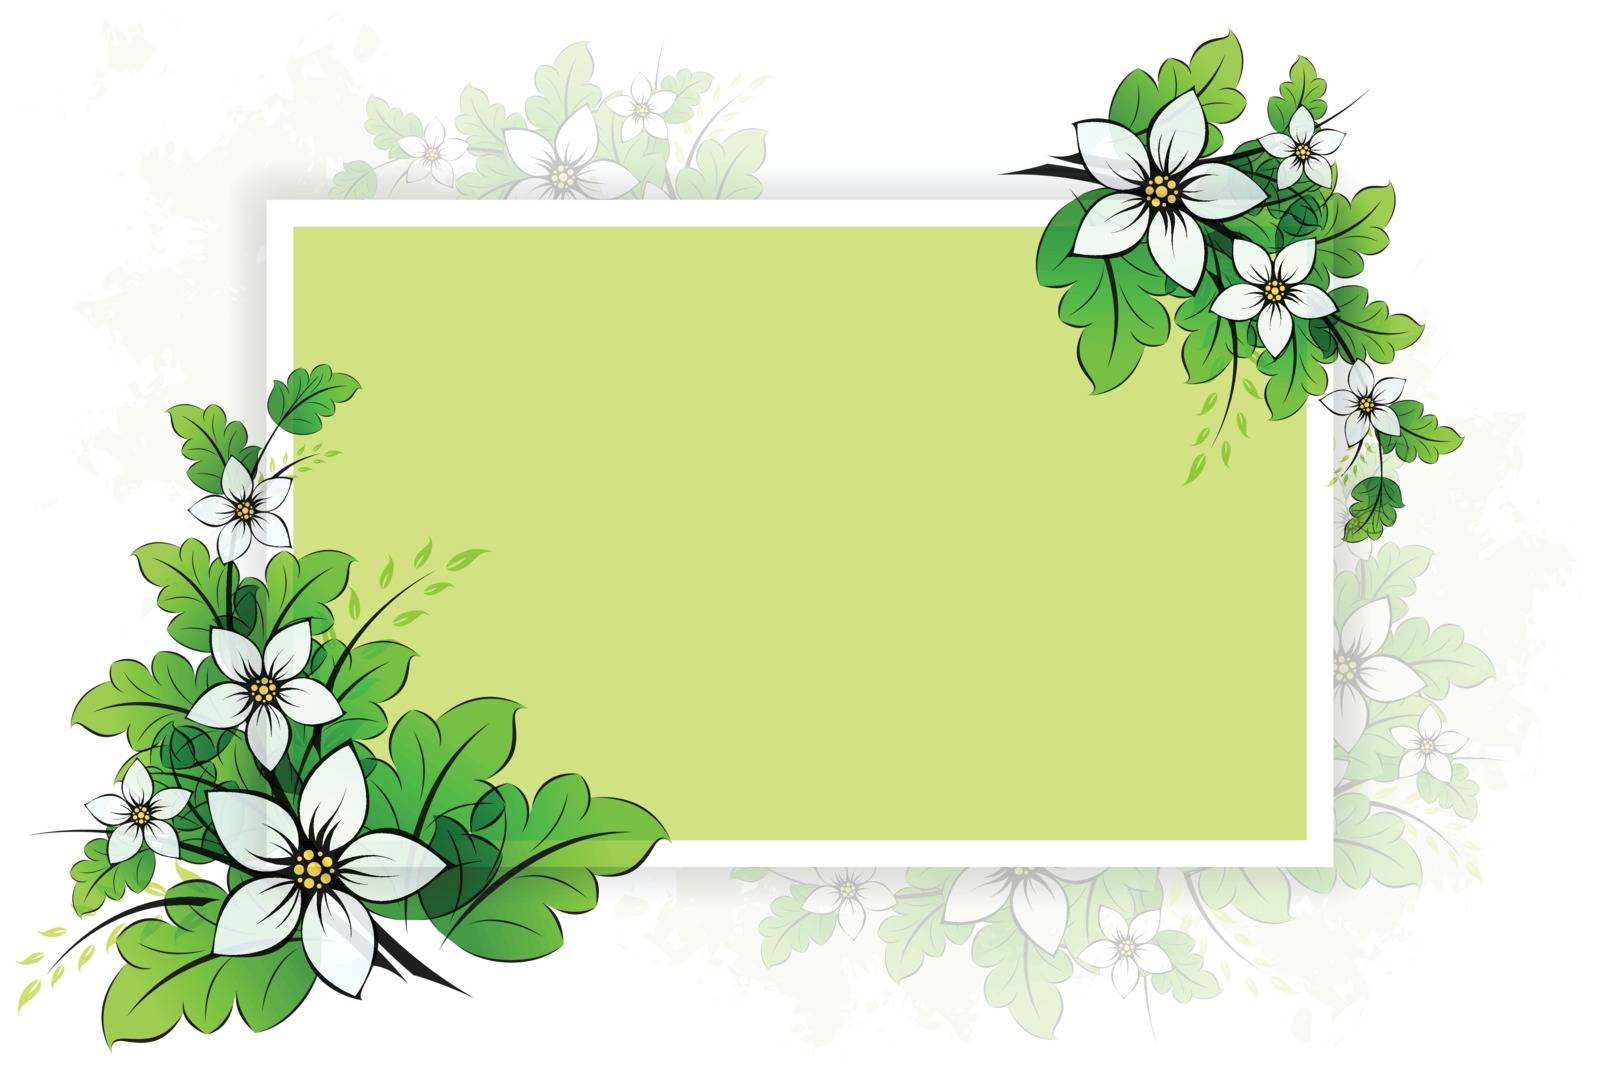 Flower background with empty board for your design